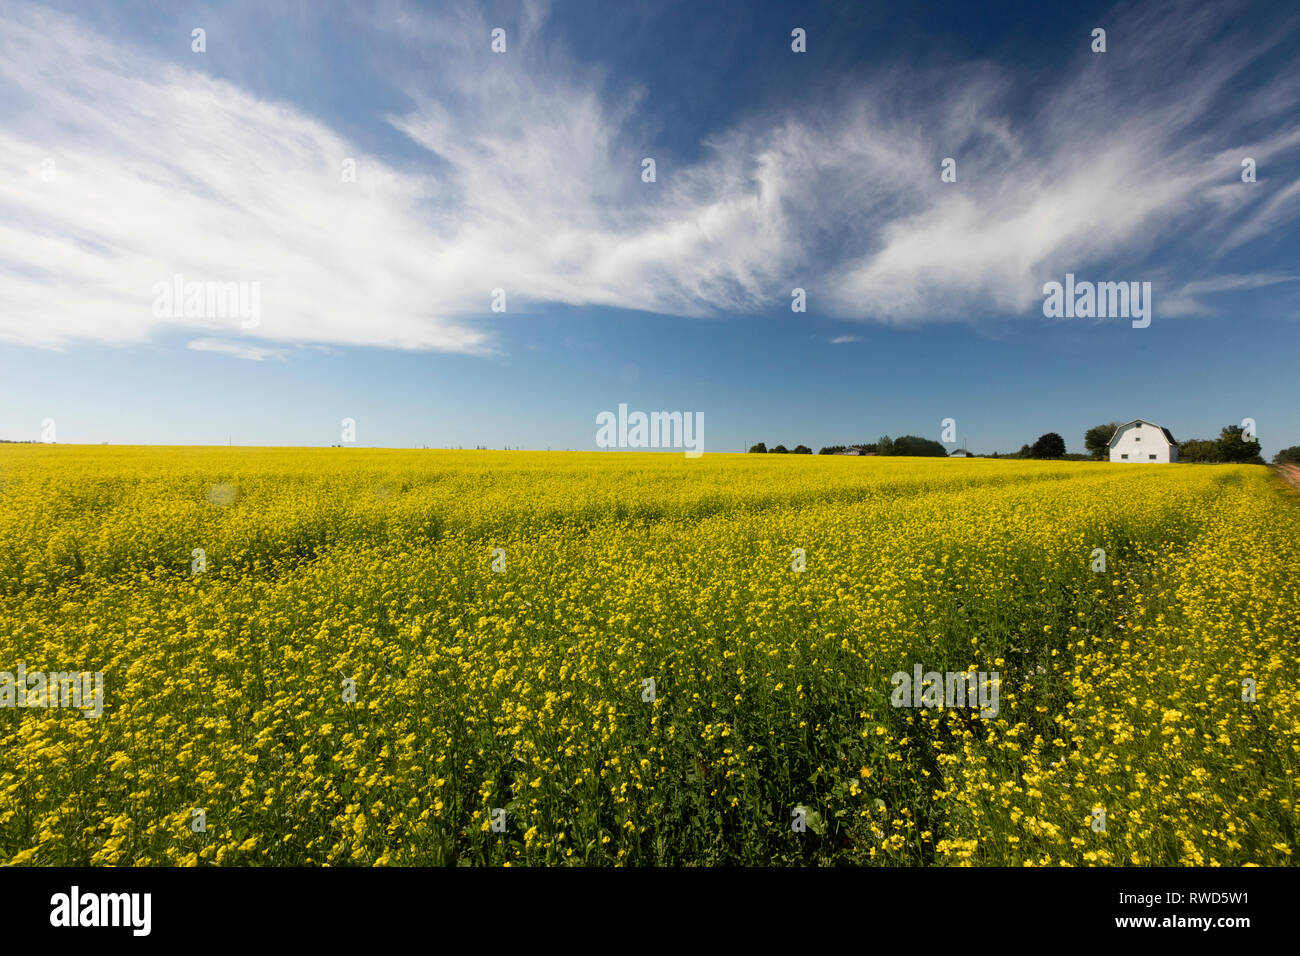 Field of Canola and clay red road, Victoria, Prince Edward Island, Canada Stock Photo